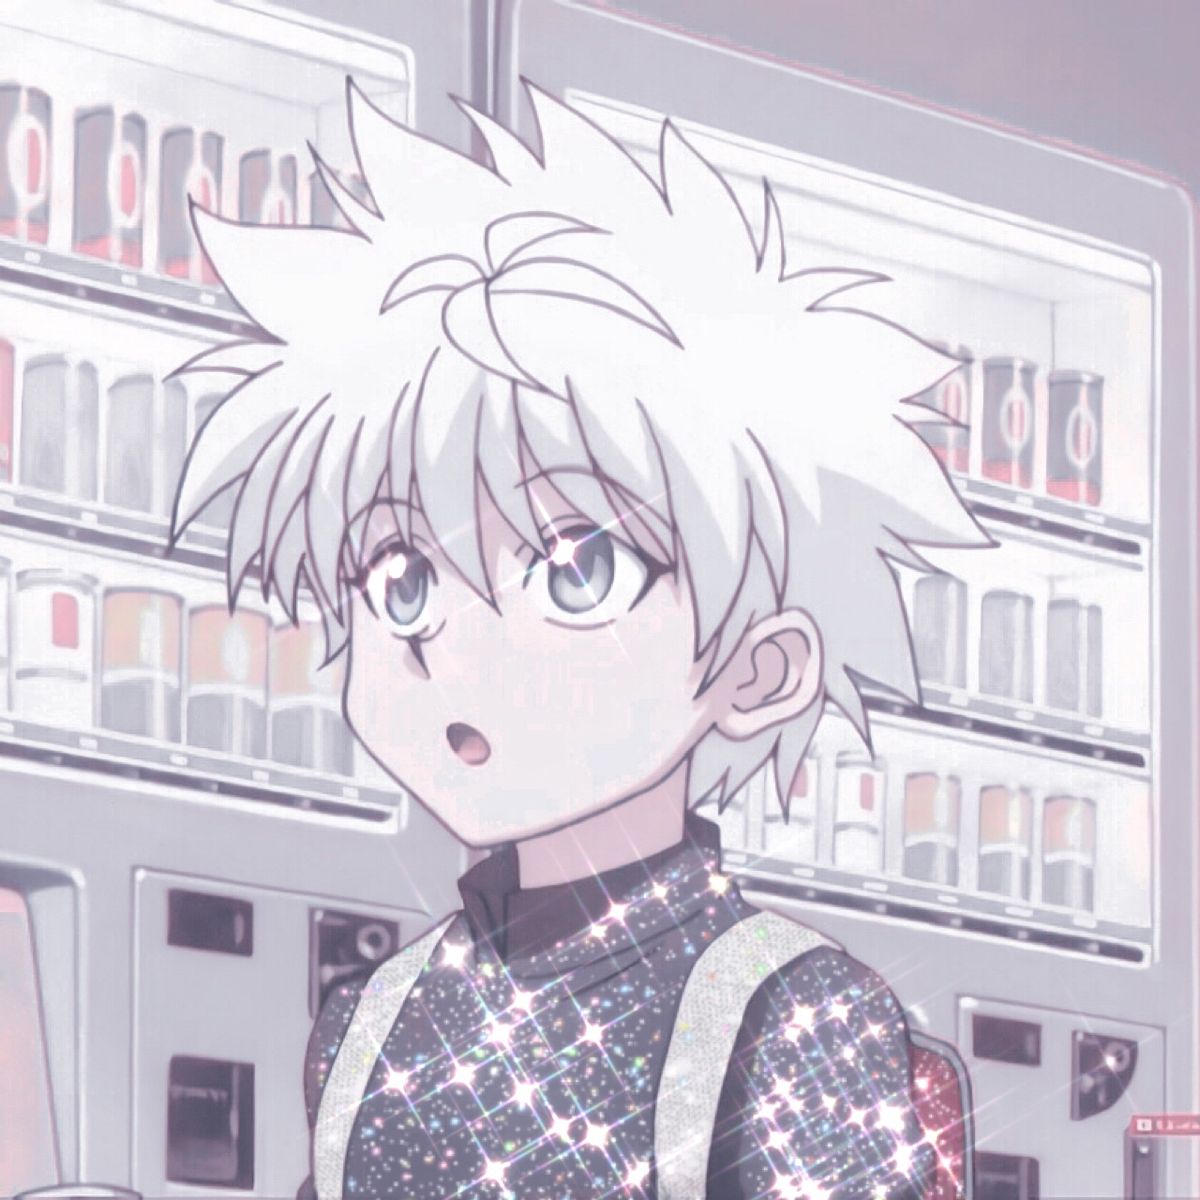 Aesthetic Anime Pfp Hxh / Gon Aesthetic Hxh Aesthetic Anime Wallpaper Gon Green Aesthetic Anime Collection By Harini Puli Last Updated 13 Days Ago Ozie Reidy / Maybe you would like to